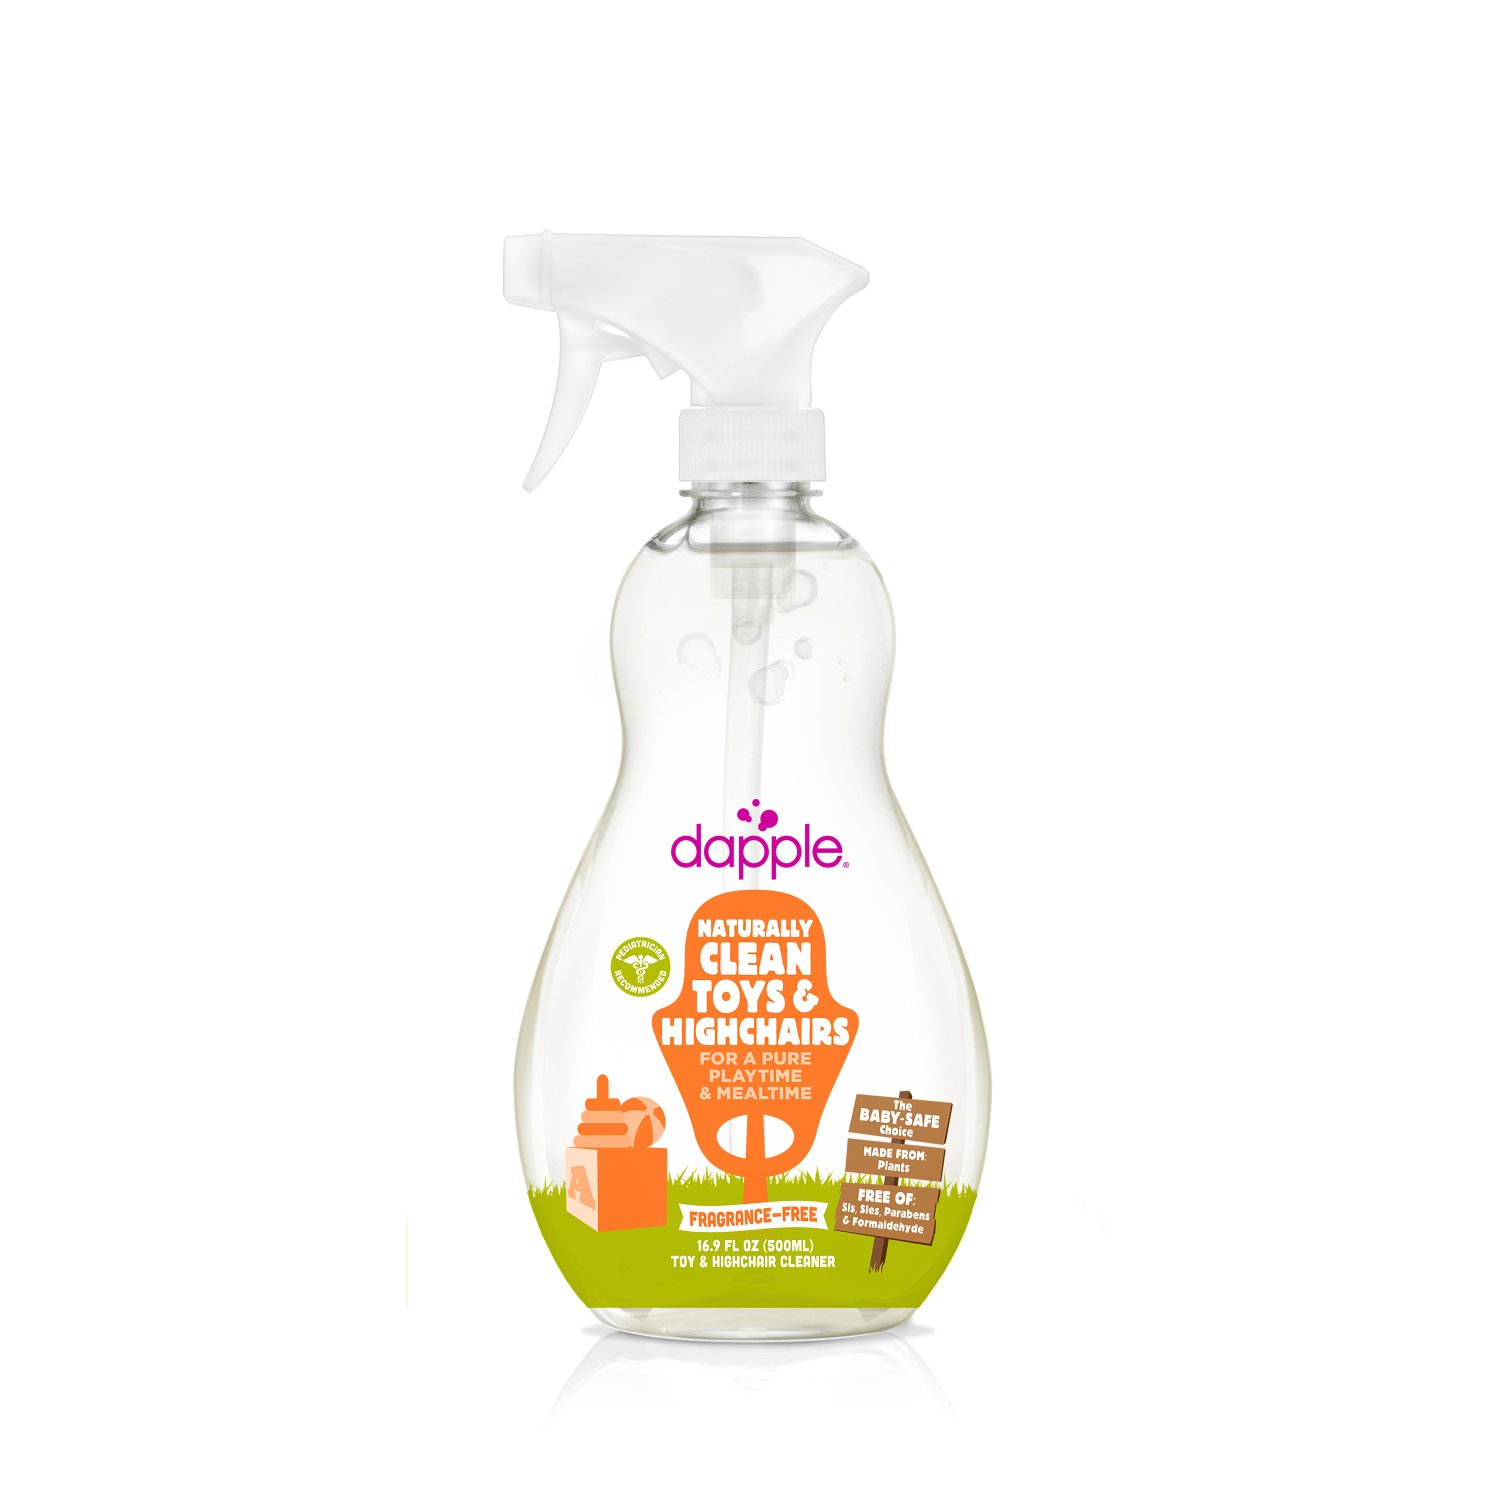 Quirks Marketing Philippines - Dapple - Naturally Clean Toys and High Chair Spray